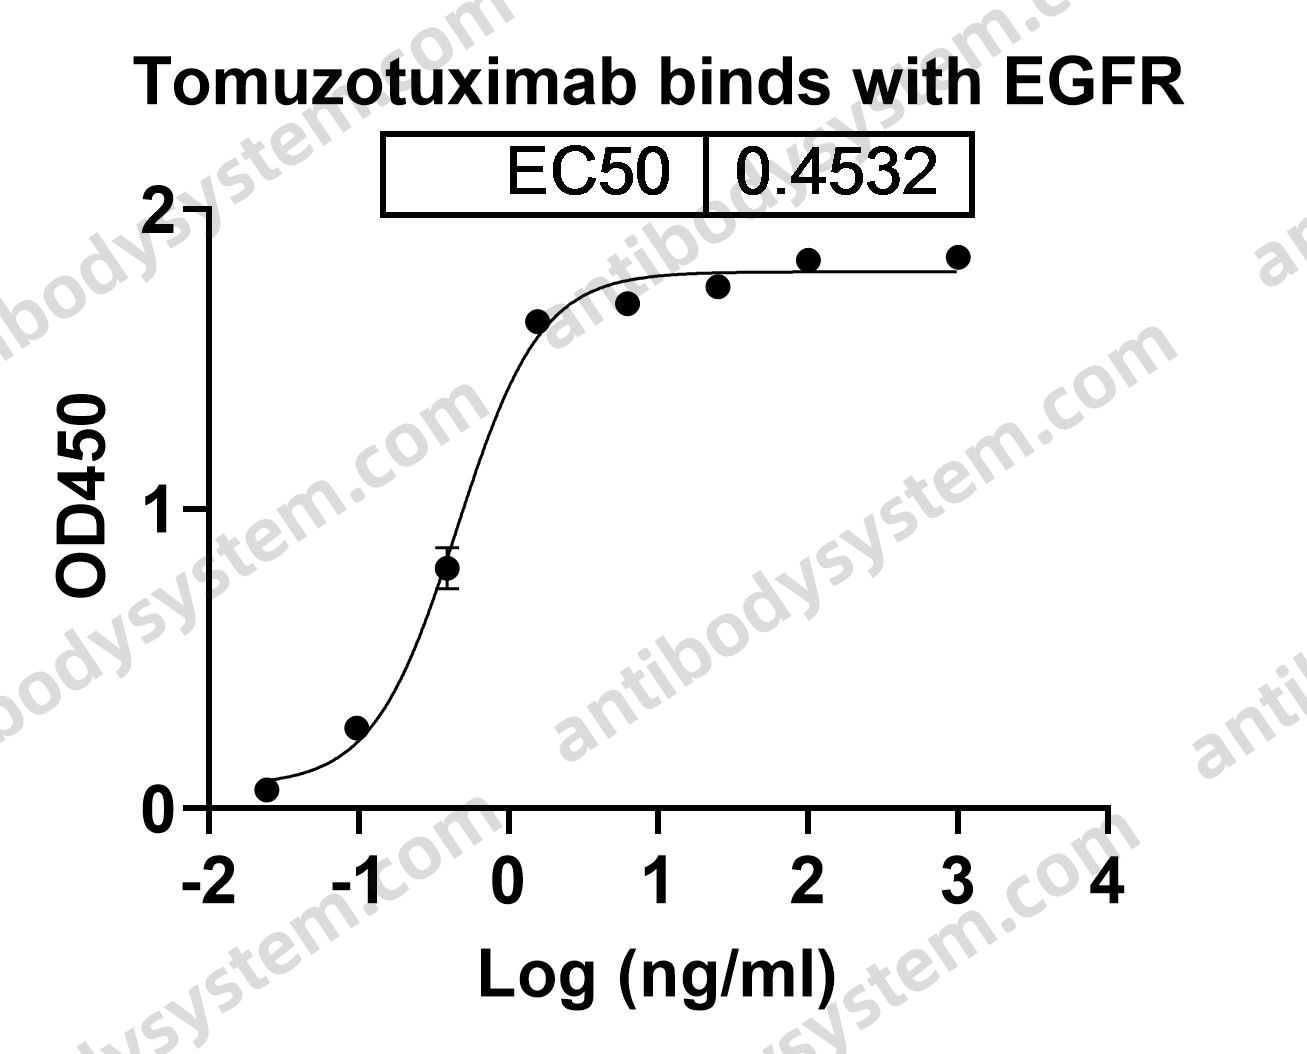 Research Grade Tomuzotuximab